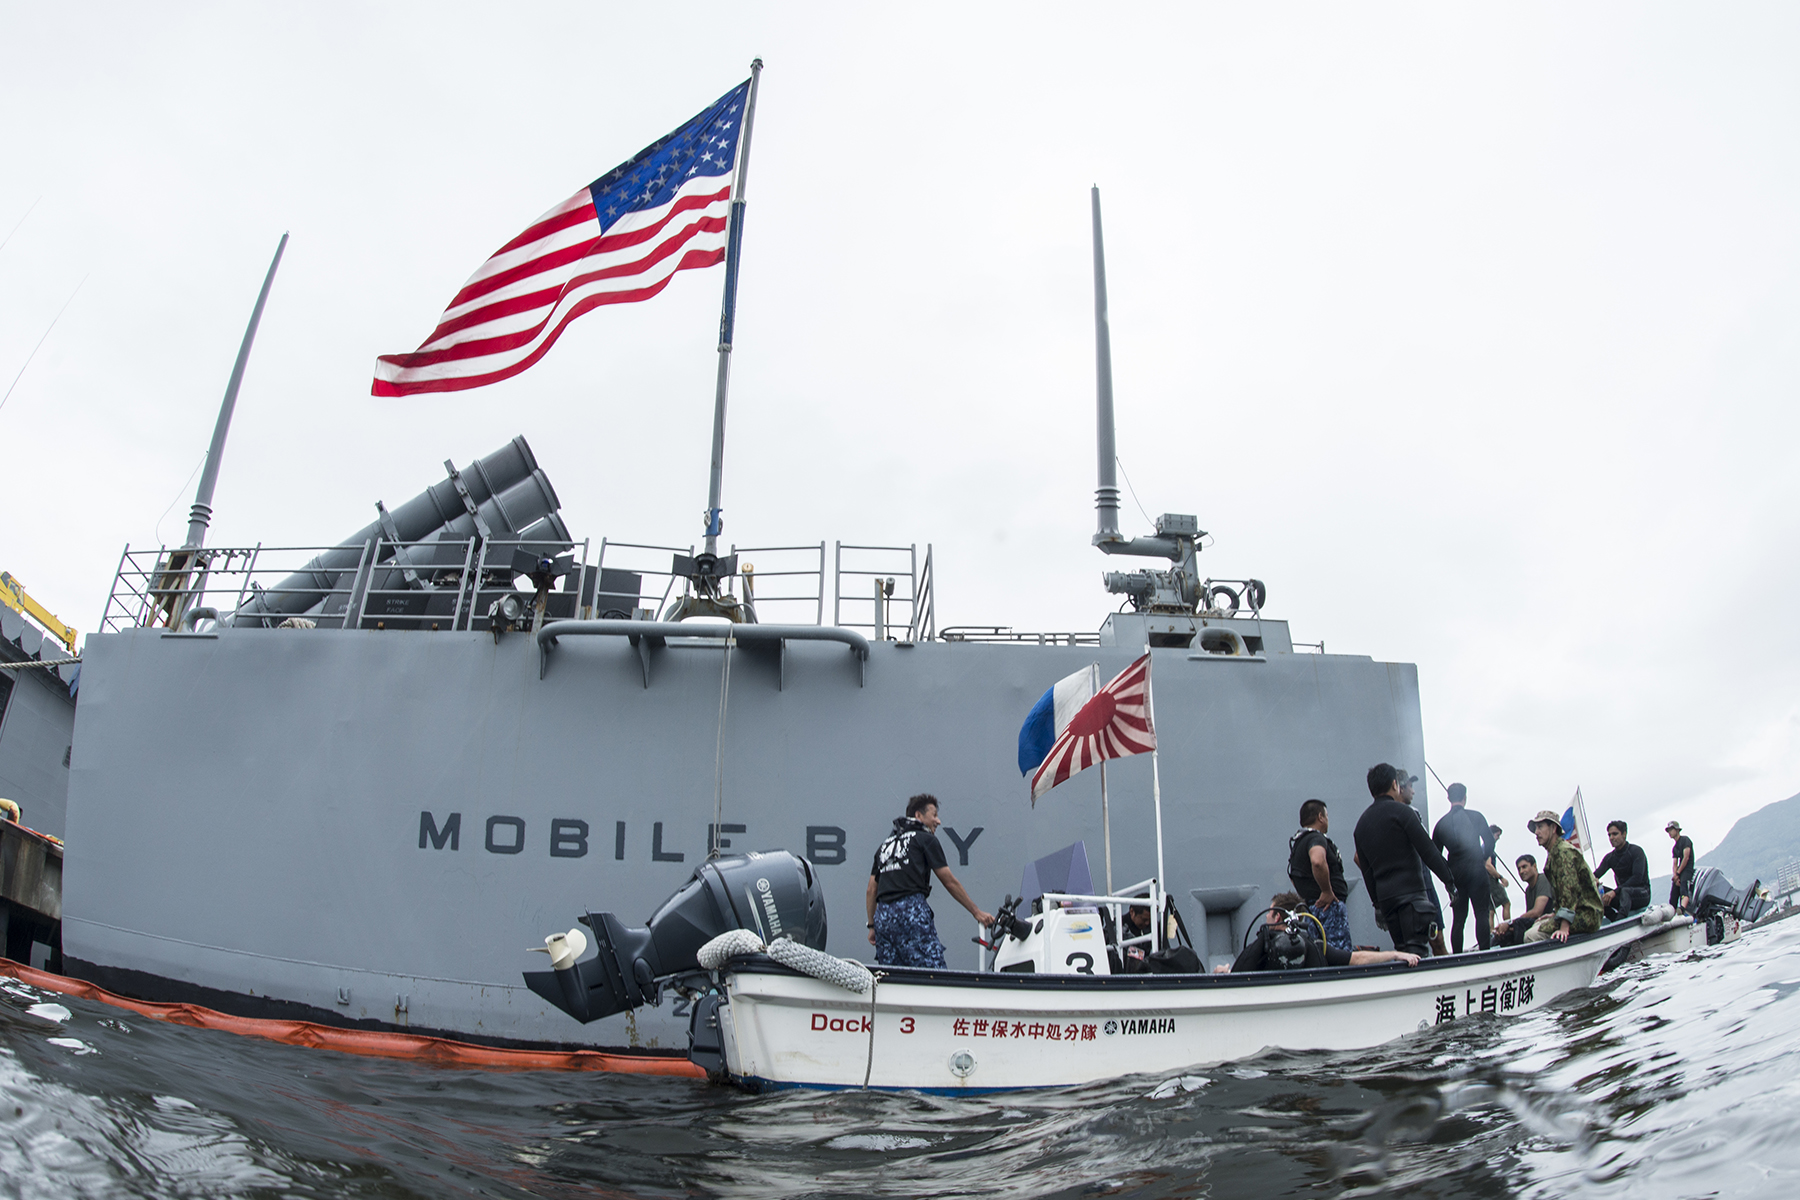 Explosive ordnance disposal technicians from the Indian Navy, Japan Maritime Self-Defense Force and U.S. Navy on a small boat